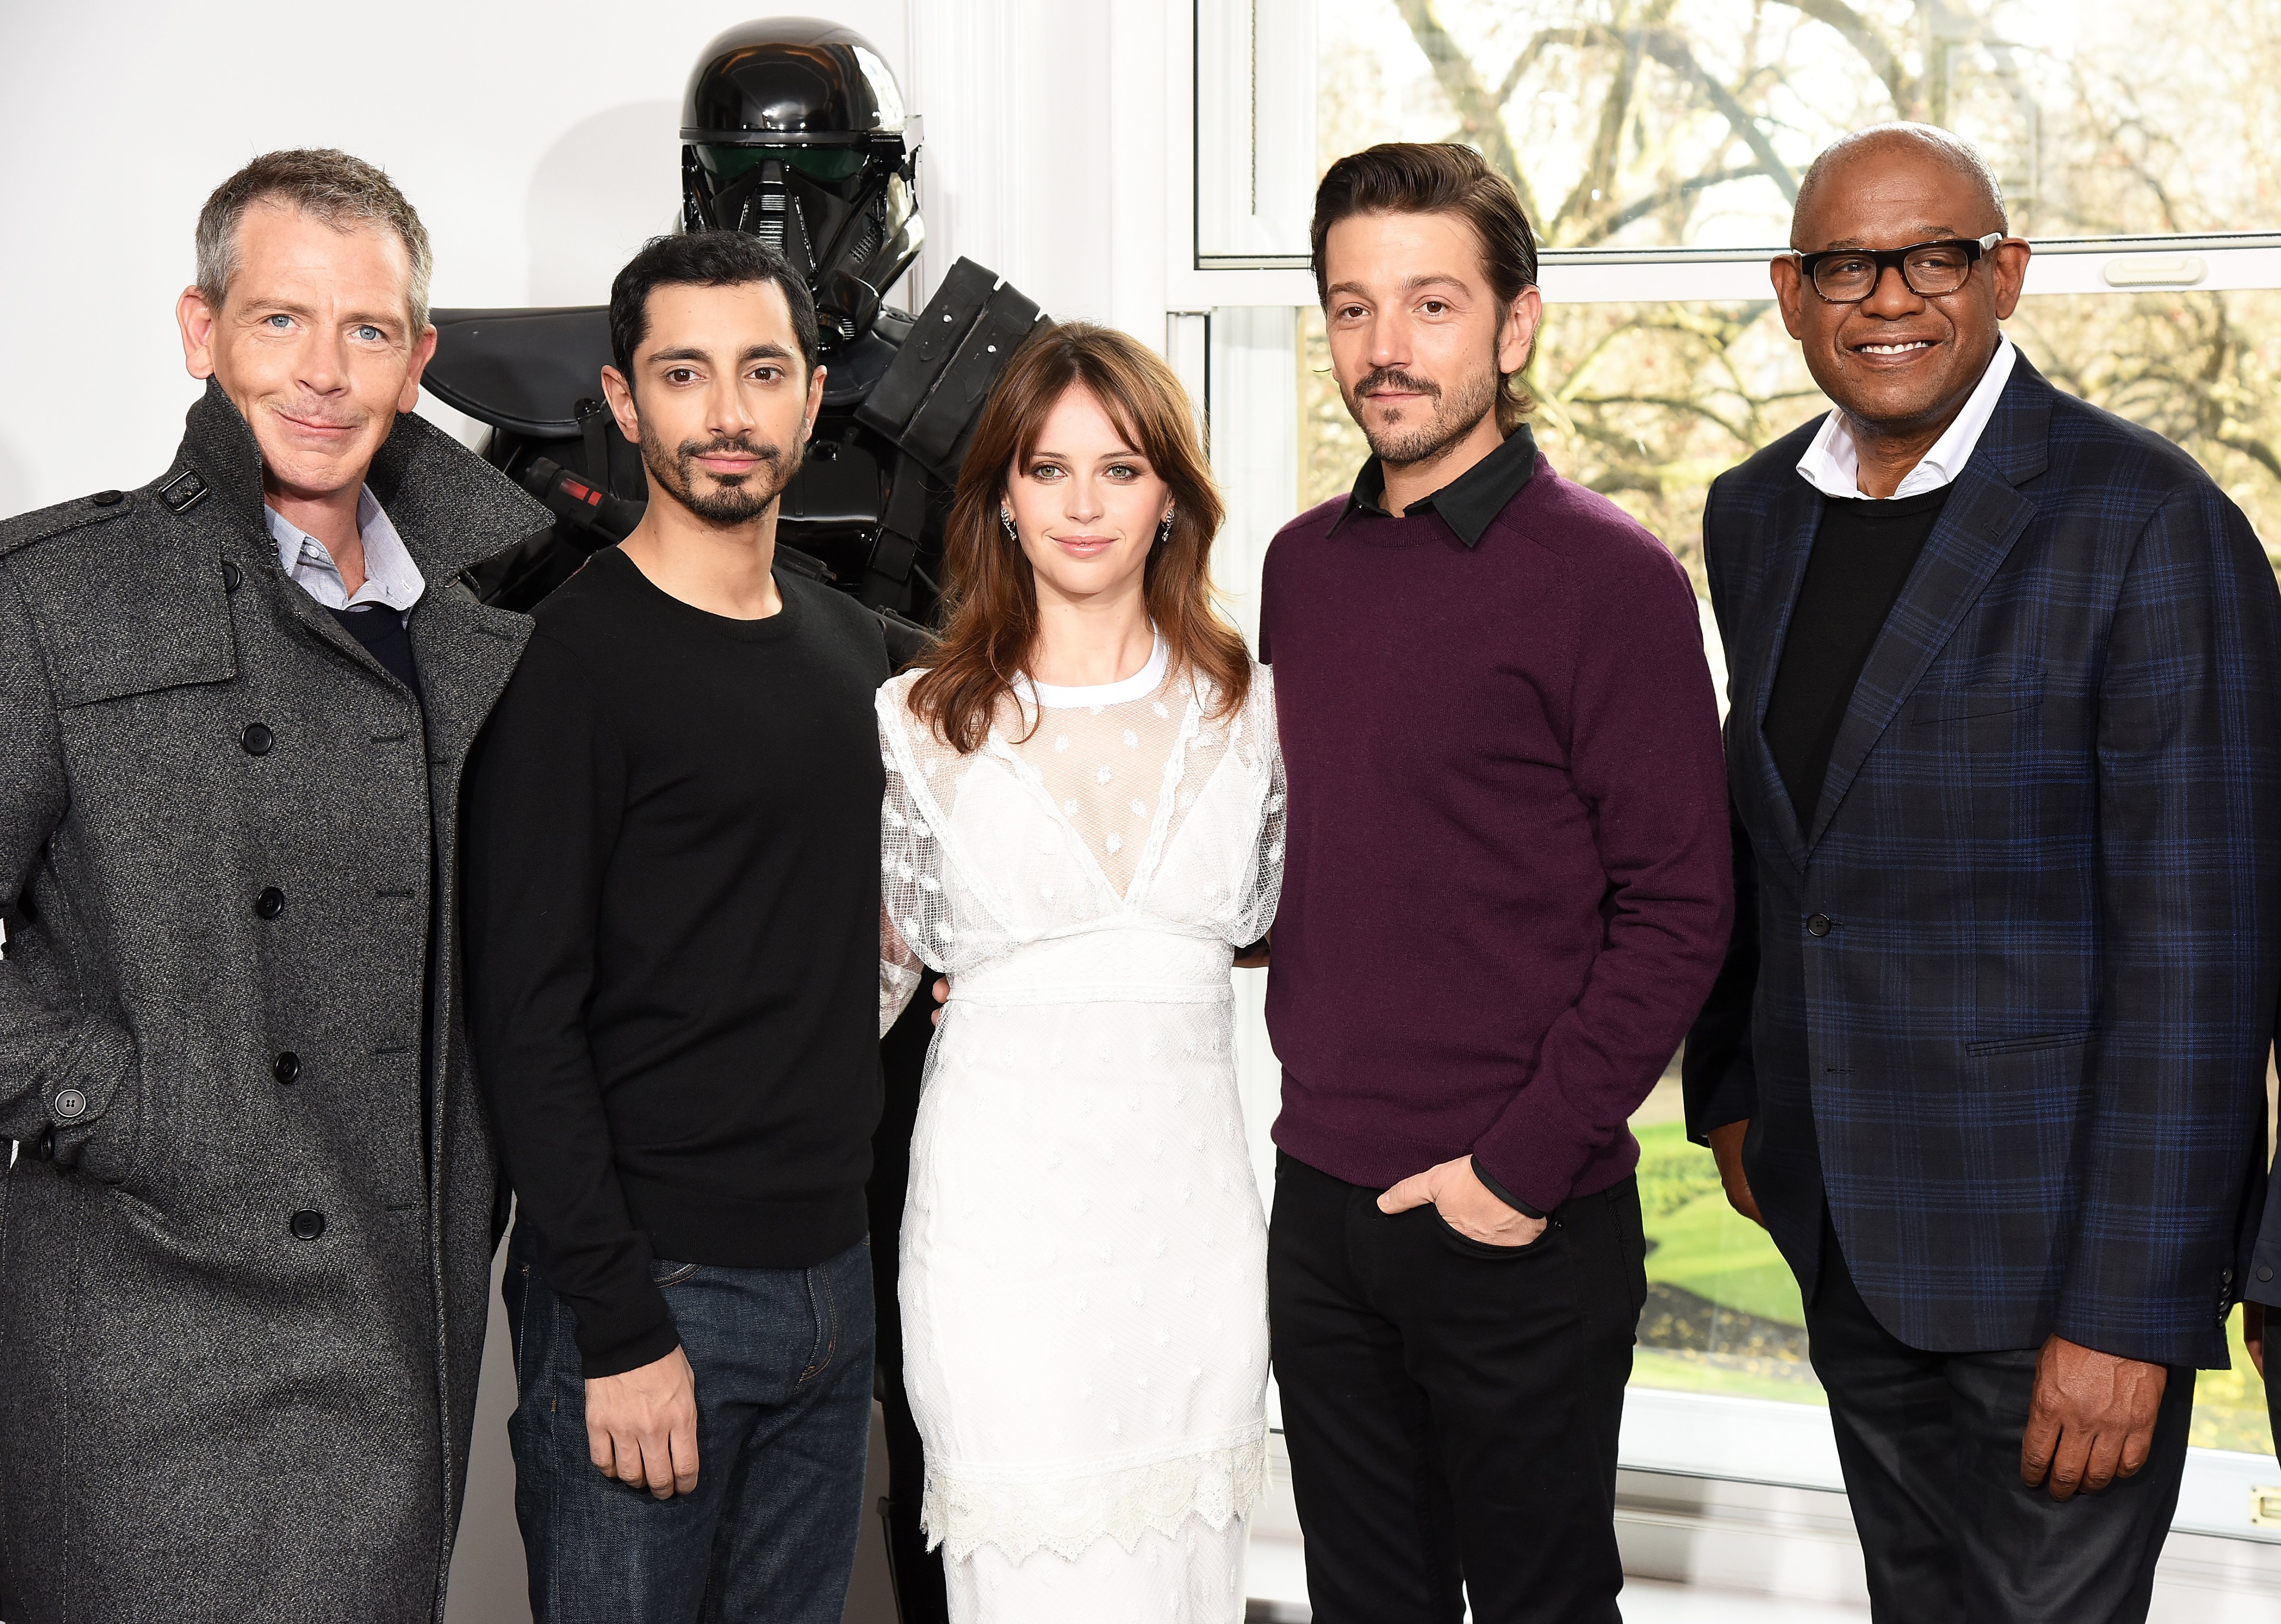 LONDON, ENGLAND - DECEMBER 14: (L-R) Ben Mendelsohn, Riz Ahmed, Felicity Jones; Diego Luna and Forest Whitaker attend the "Rogue One: A Star Wars Story" photocall at The Corinthia Hotel on December 14, 2016 in London, England.  (Photo by Dave J Hogan/Getty Images) (Dave J Hogan—Getty Images)